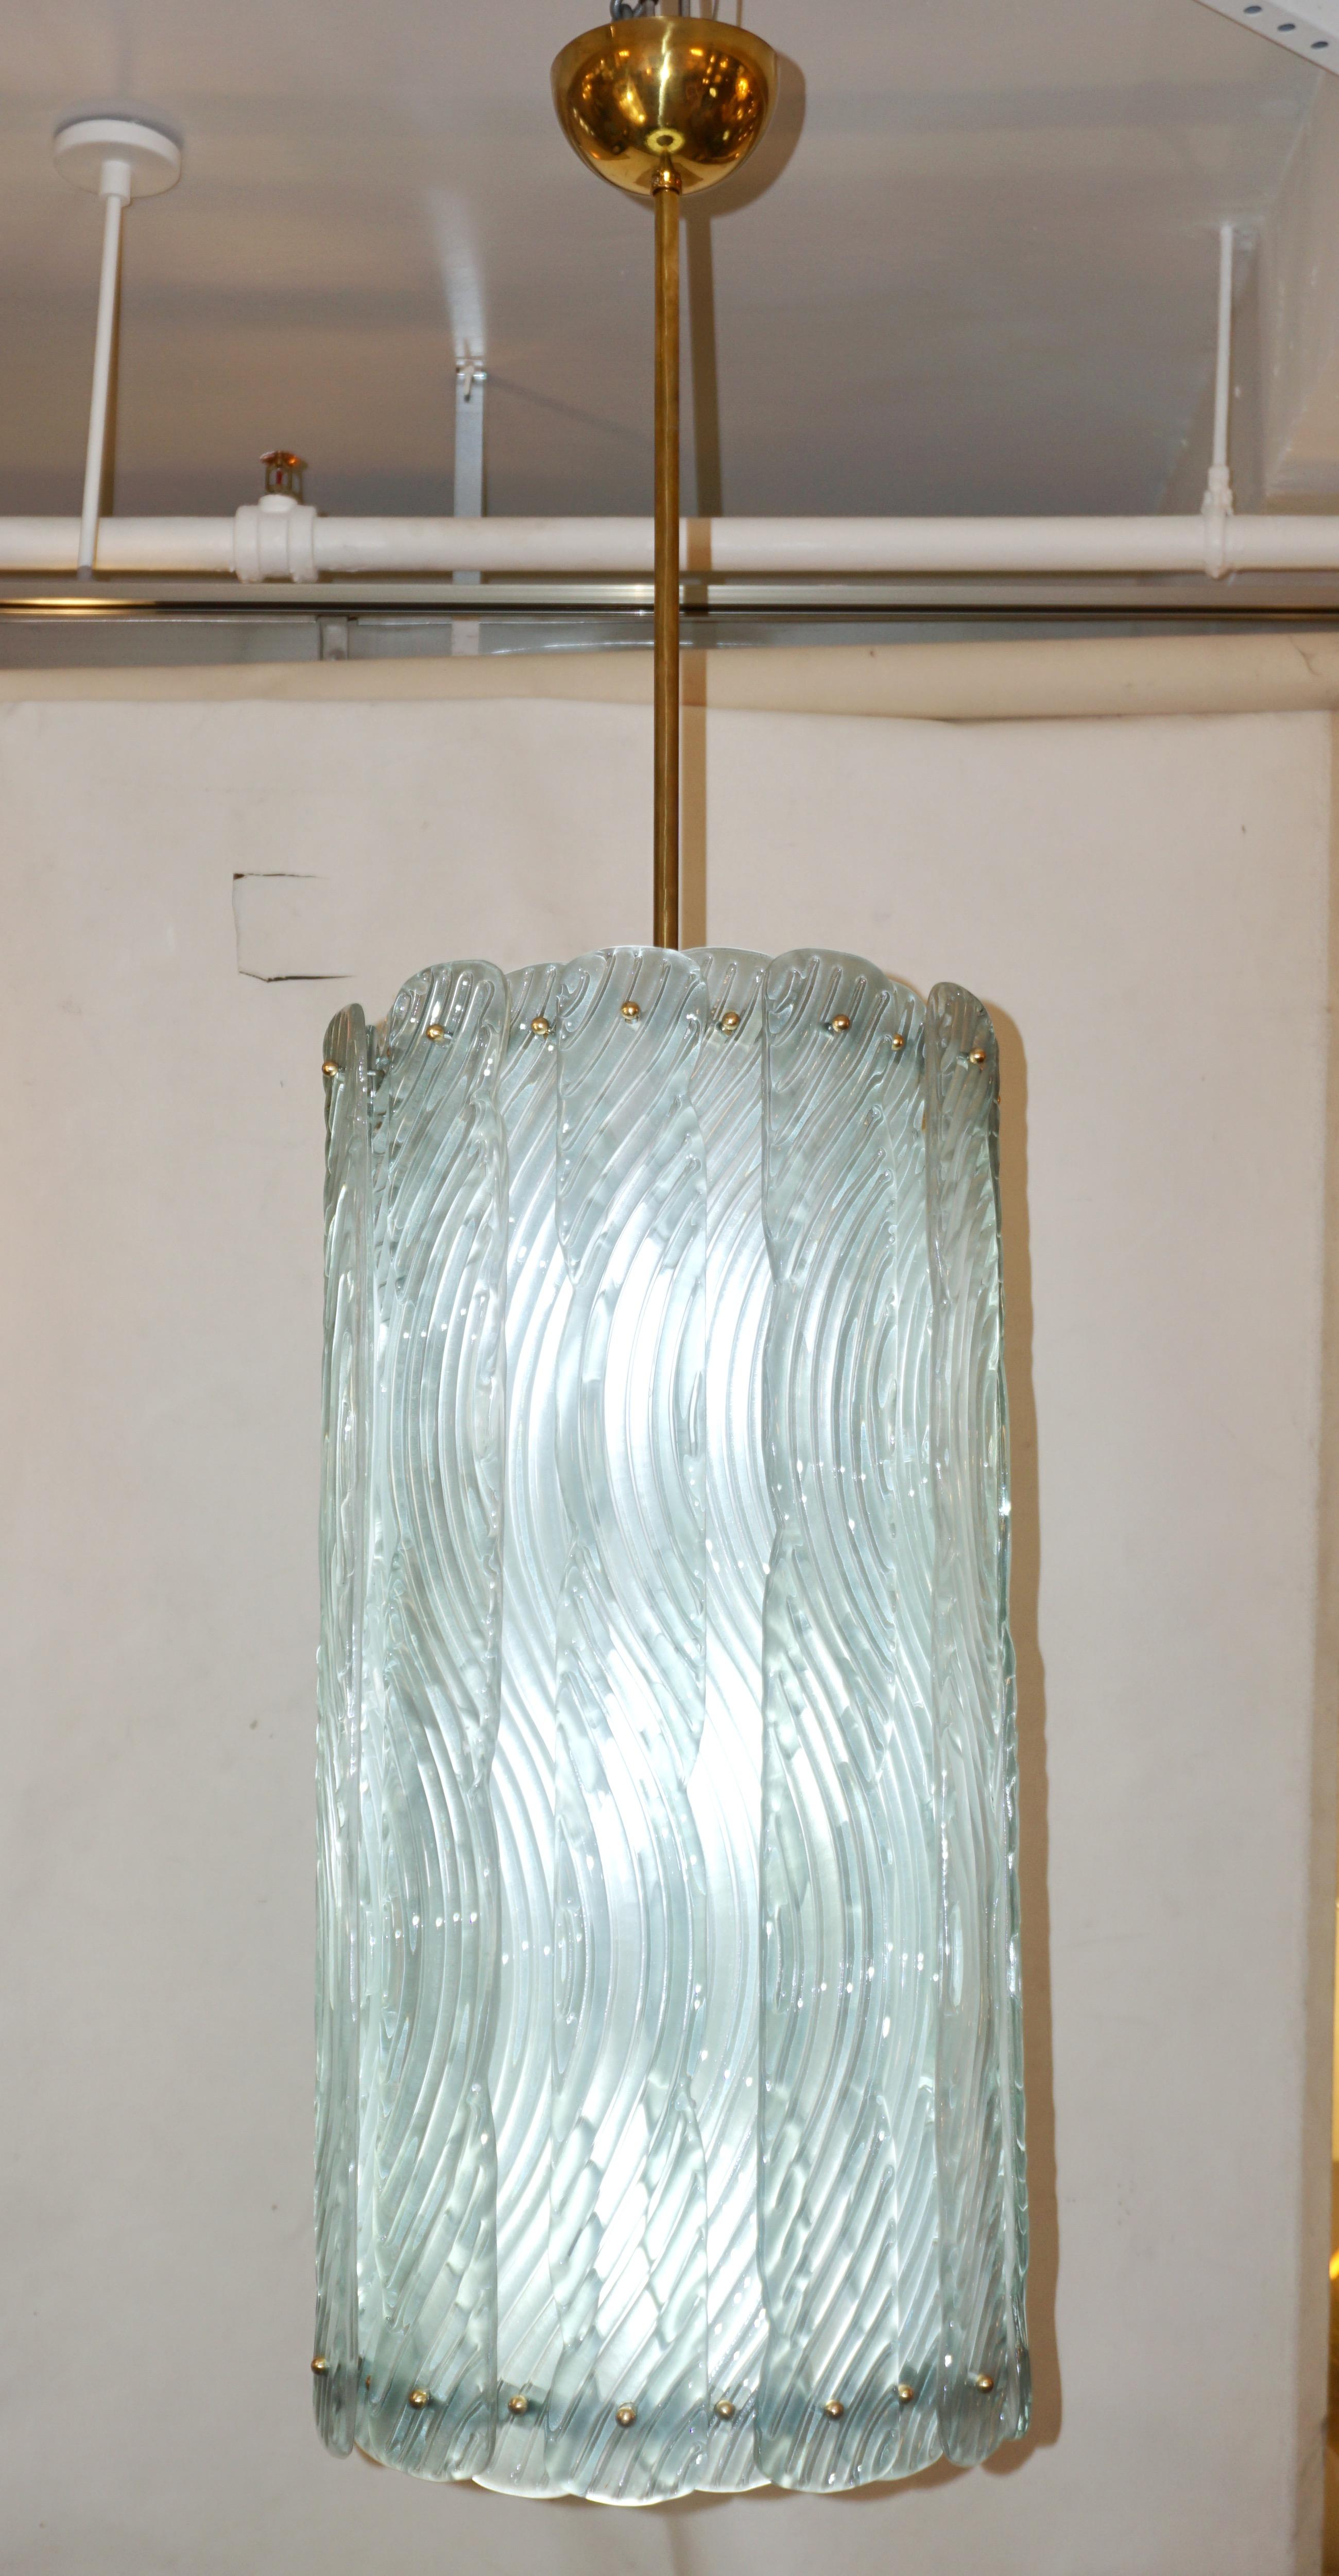 Contemporary Italian Art Deco design huge round pendant chandelier, entirely handcrafted. This light fixture is composed of a handmade brass structure supporting textured frosted Murano glass curved bands with a sophisticated green azure blue color,